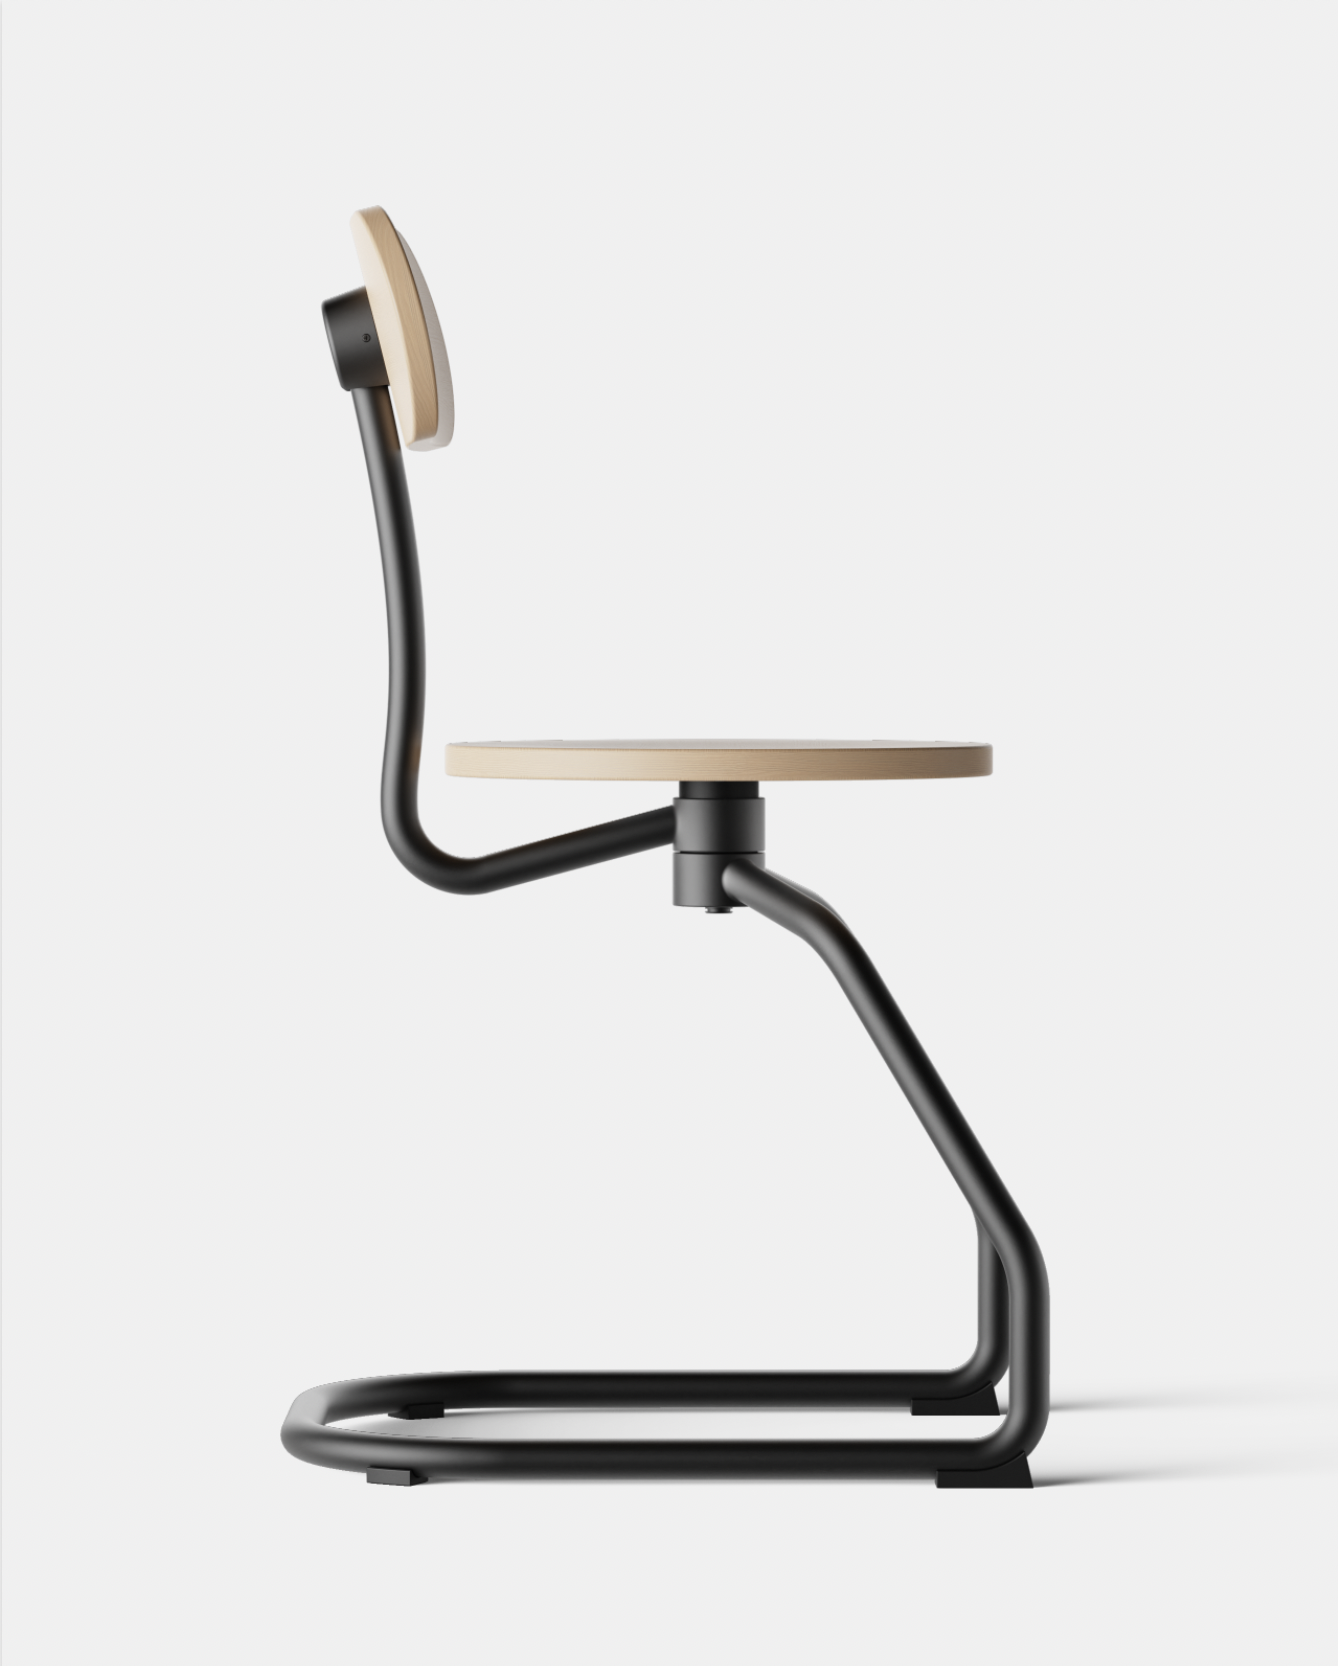 chair product industrial design ecal Stéfanie Kay design active sitting wood metal back pain comfortable